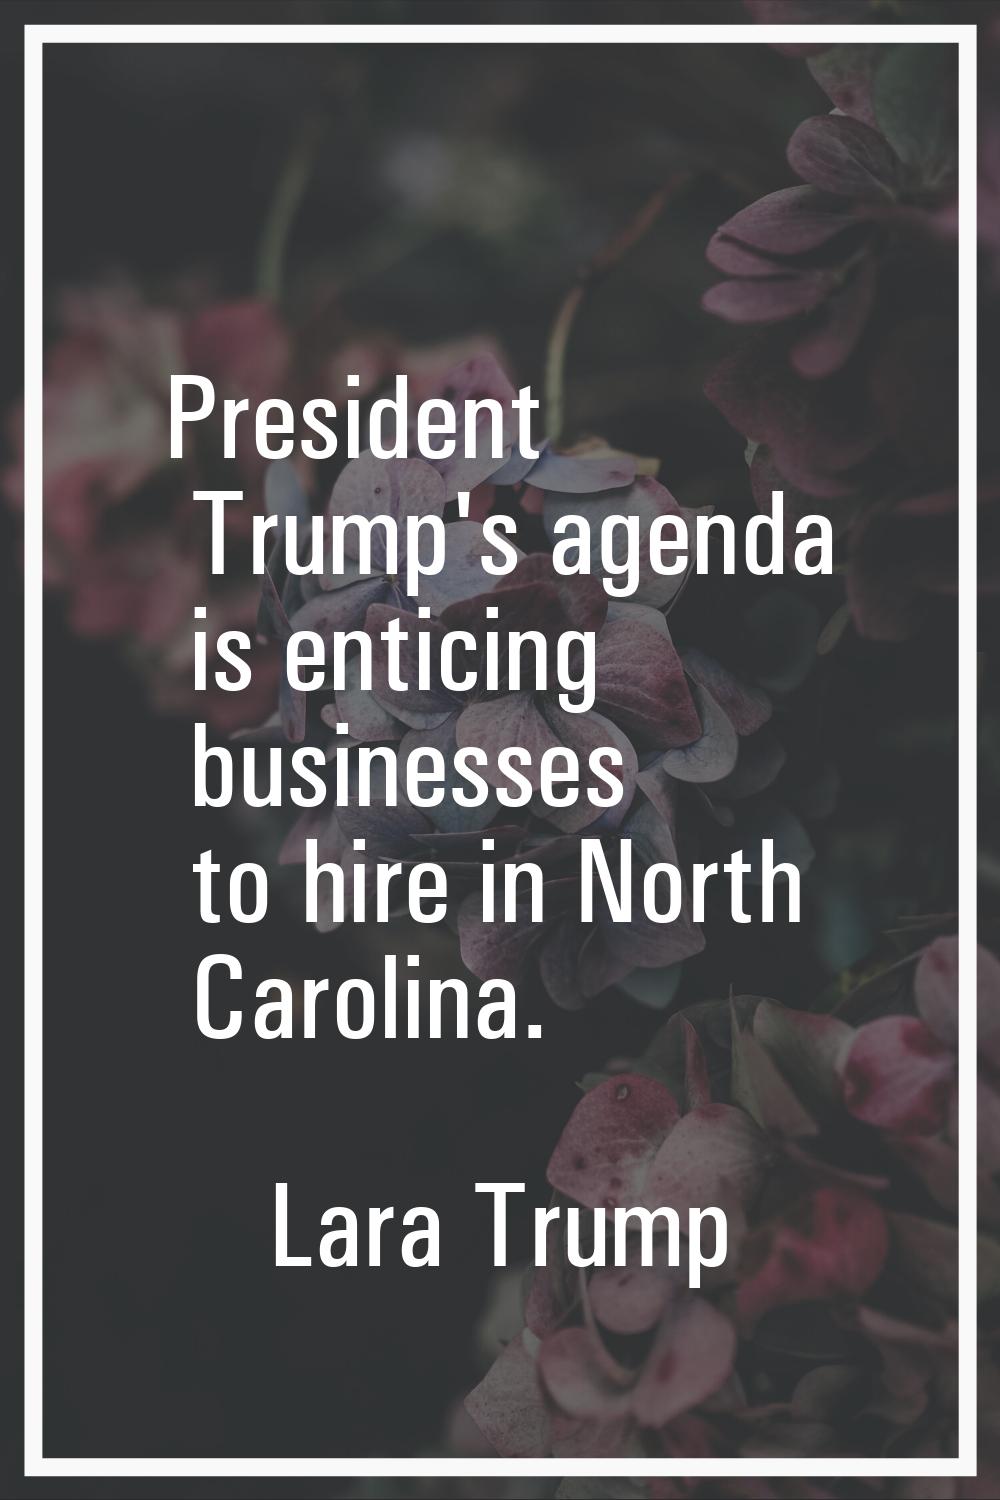 President Trump's agenda is enticing businesses to hire in North Carolina.